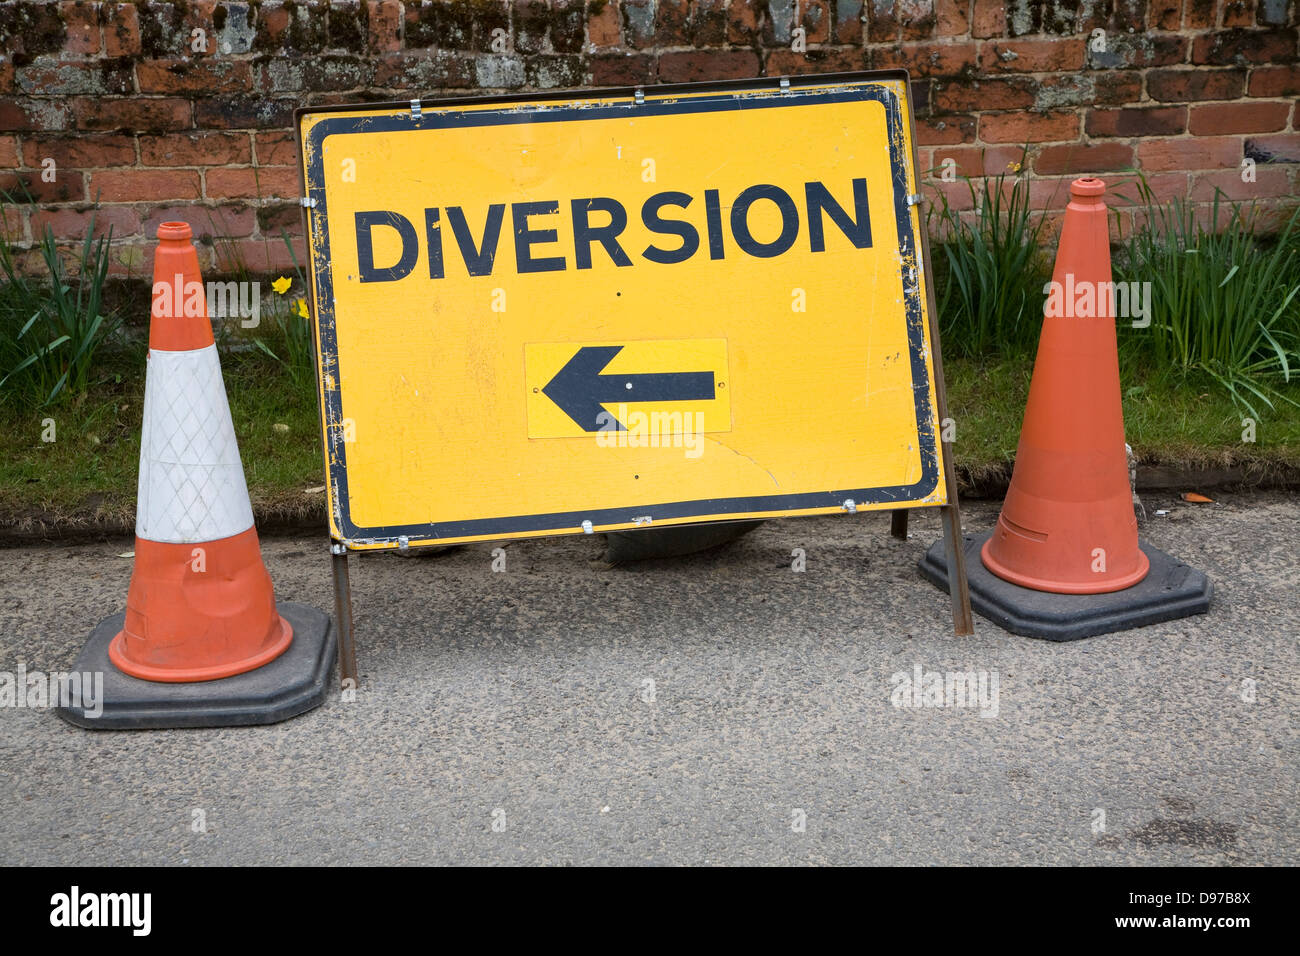 Yellow rectangular diversion sign with arrow pointing standing by two traffic cones, UK Stock Photo